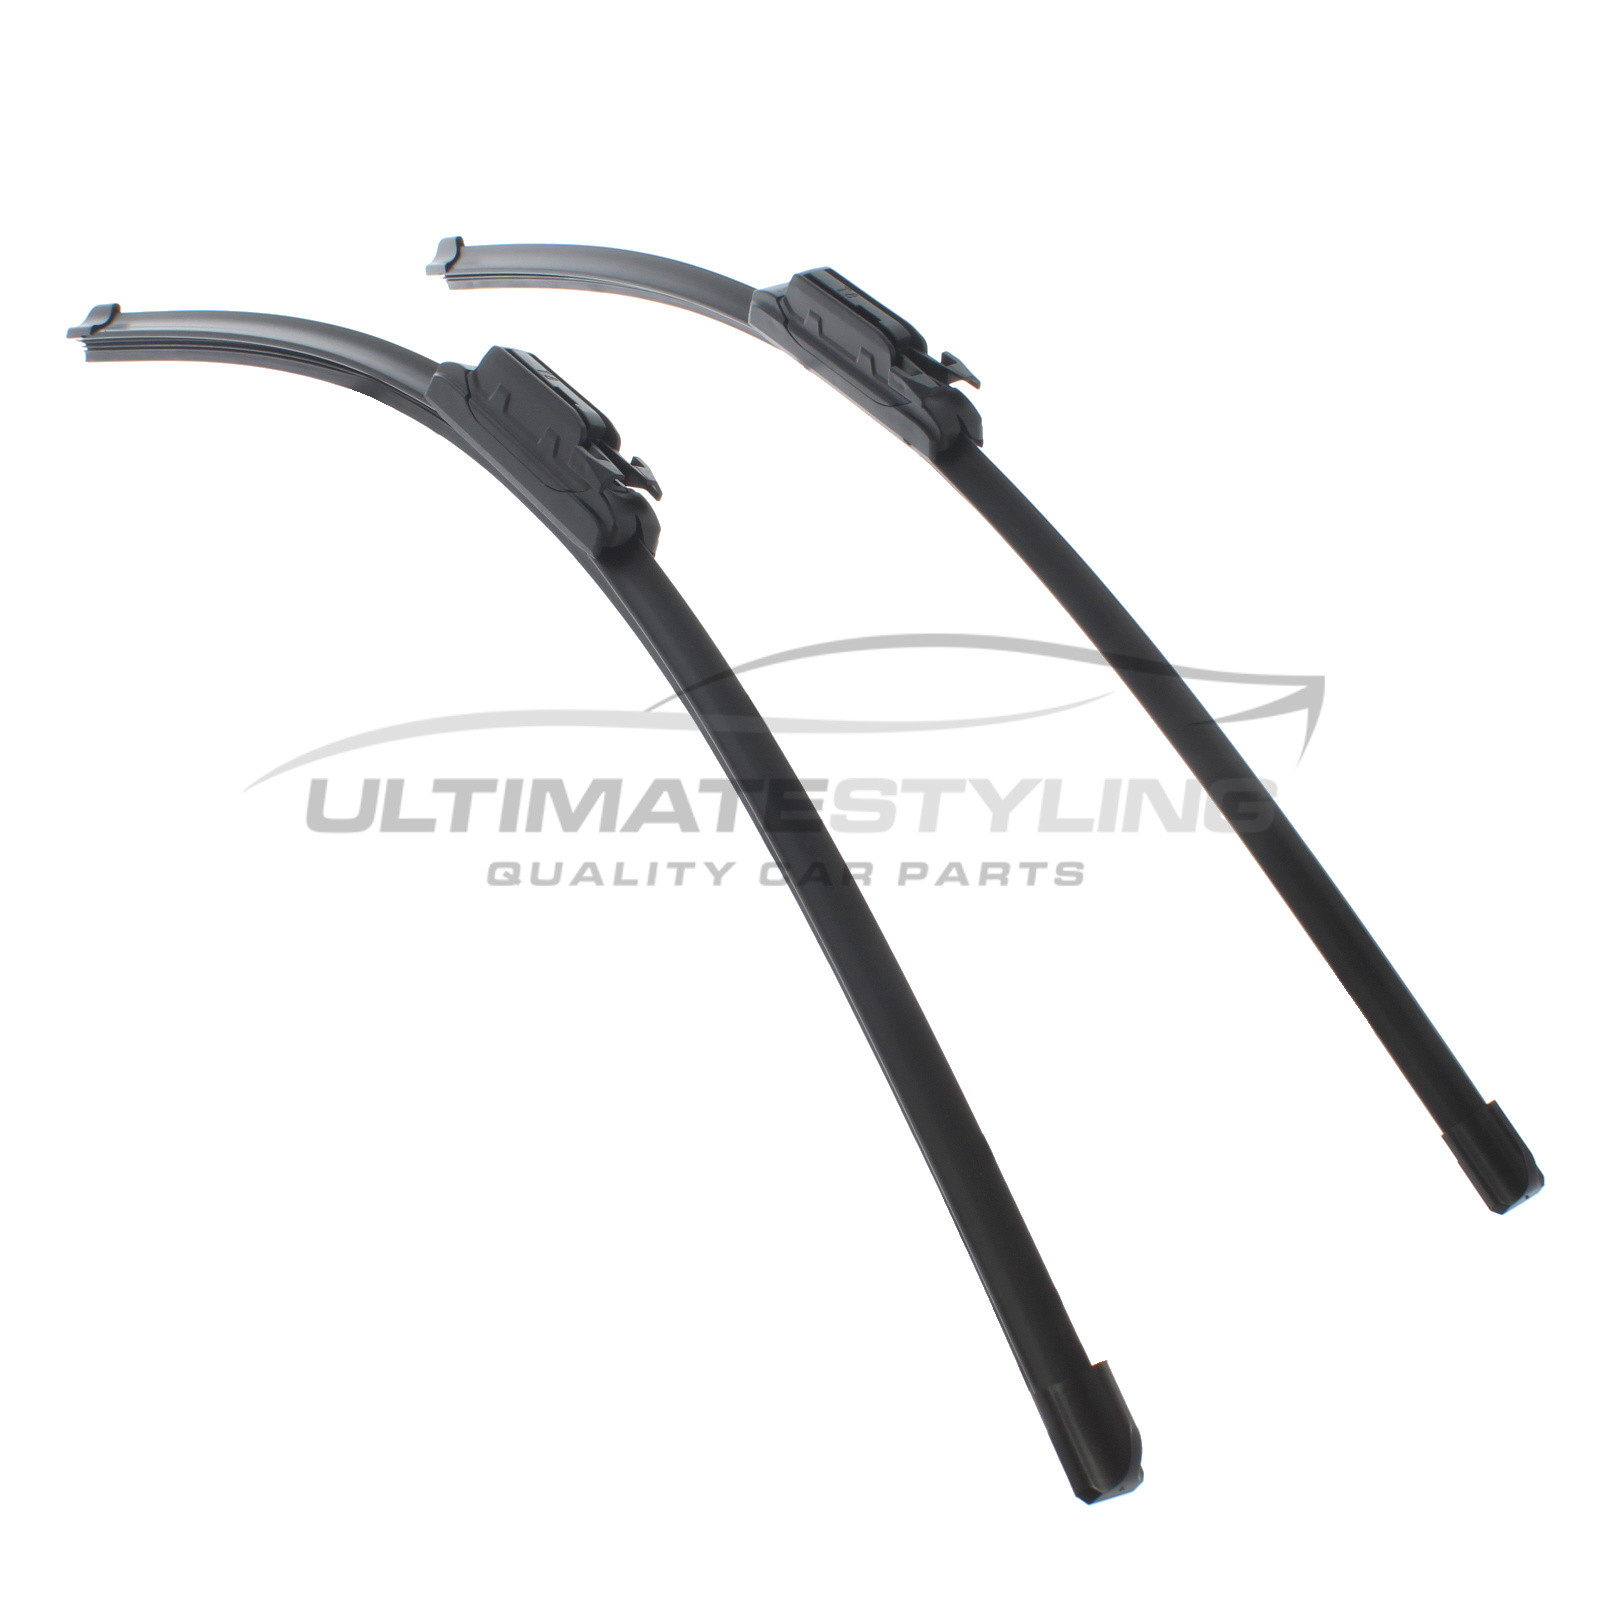 Drivers Side & Passenger Side (Front) Wiper Blades for Seat Toledo